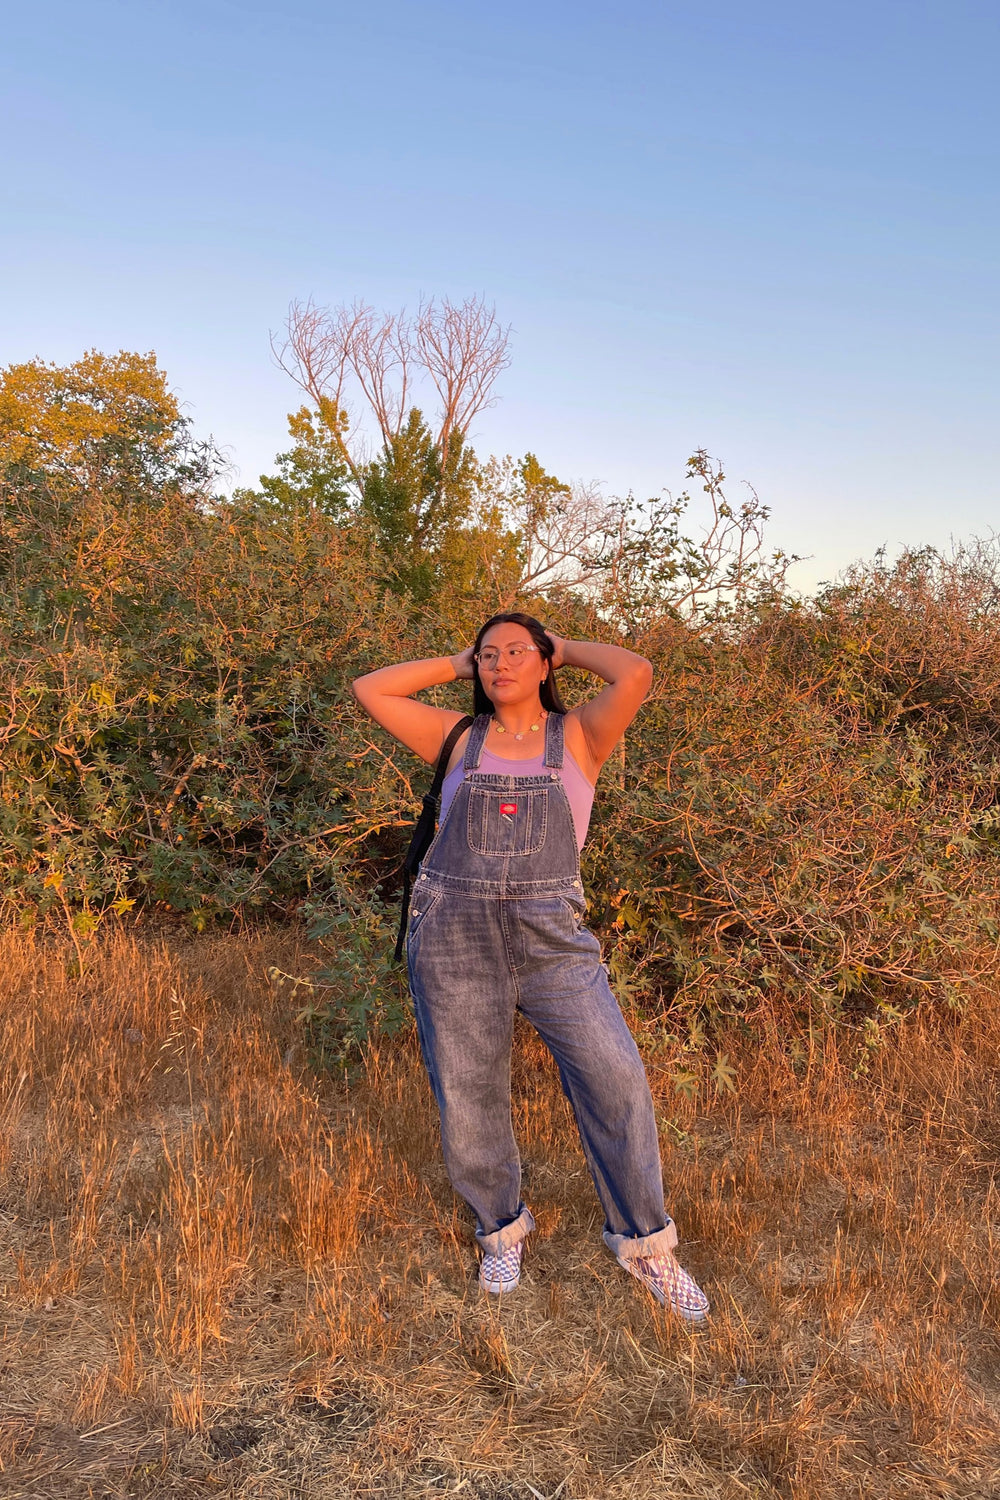 Medium Antique Wash Relaxed Overalls